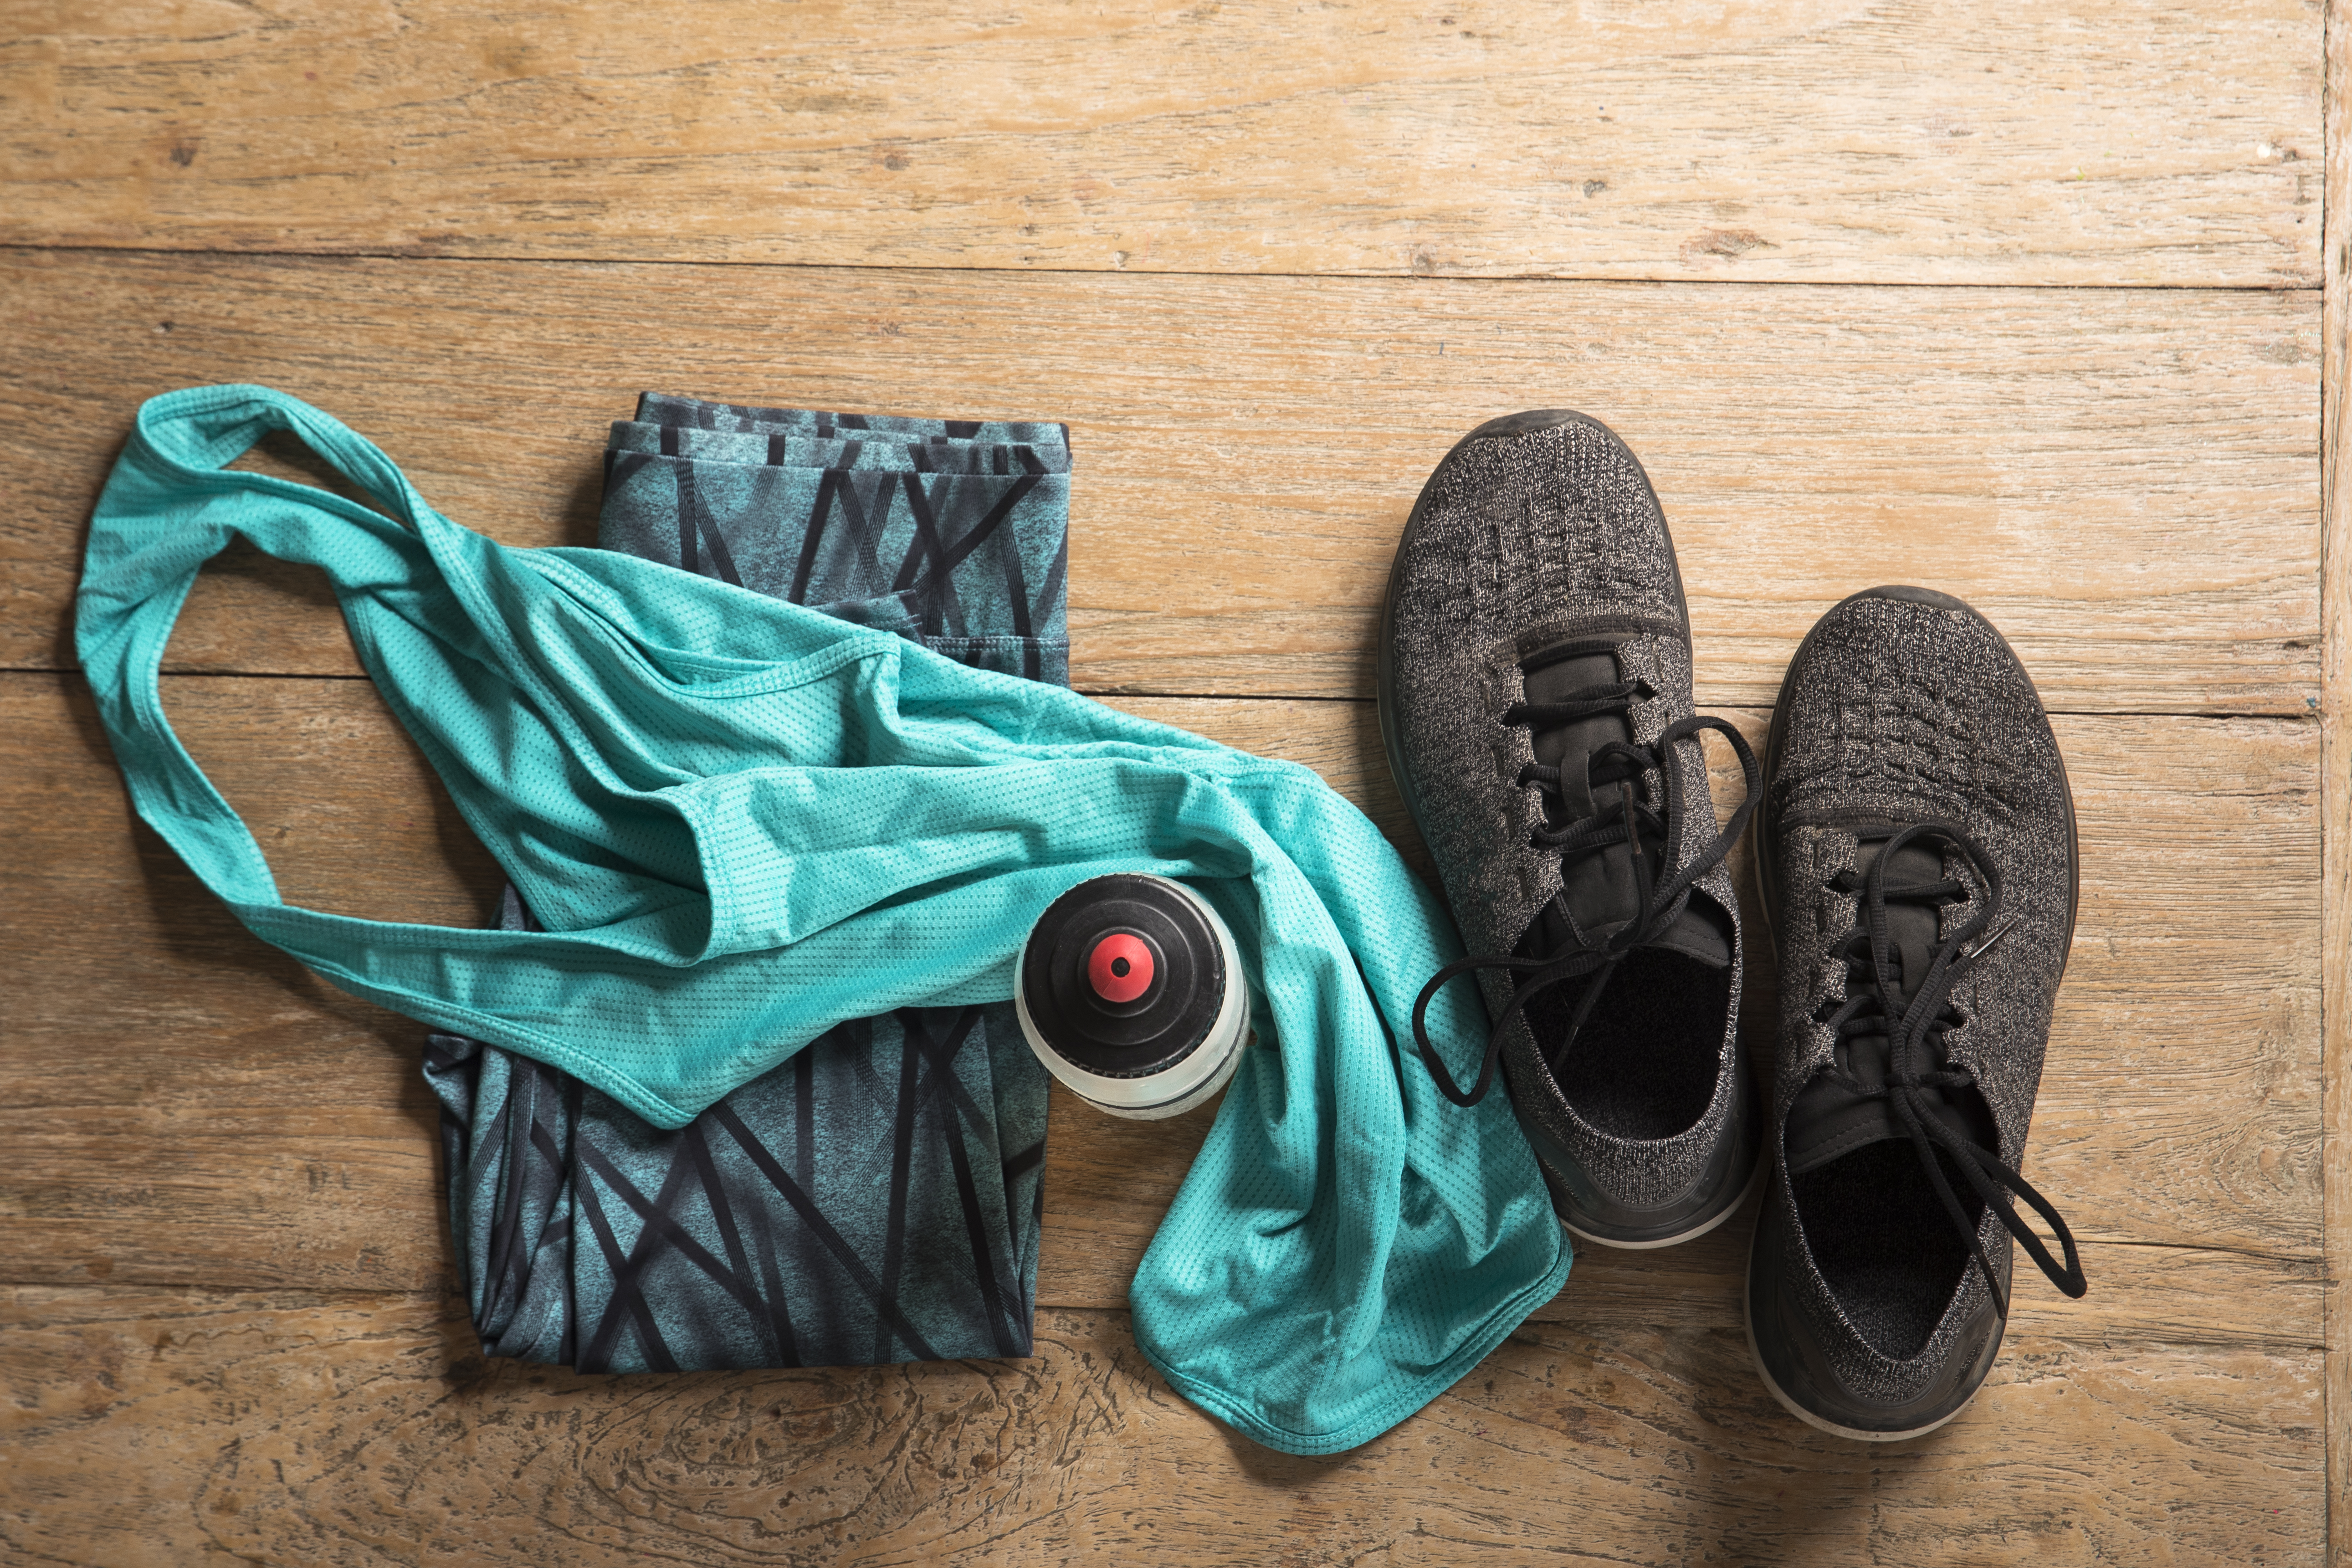 Flat Lay image of sports clothes and shoes on a wooden floor.